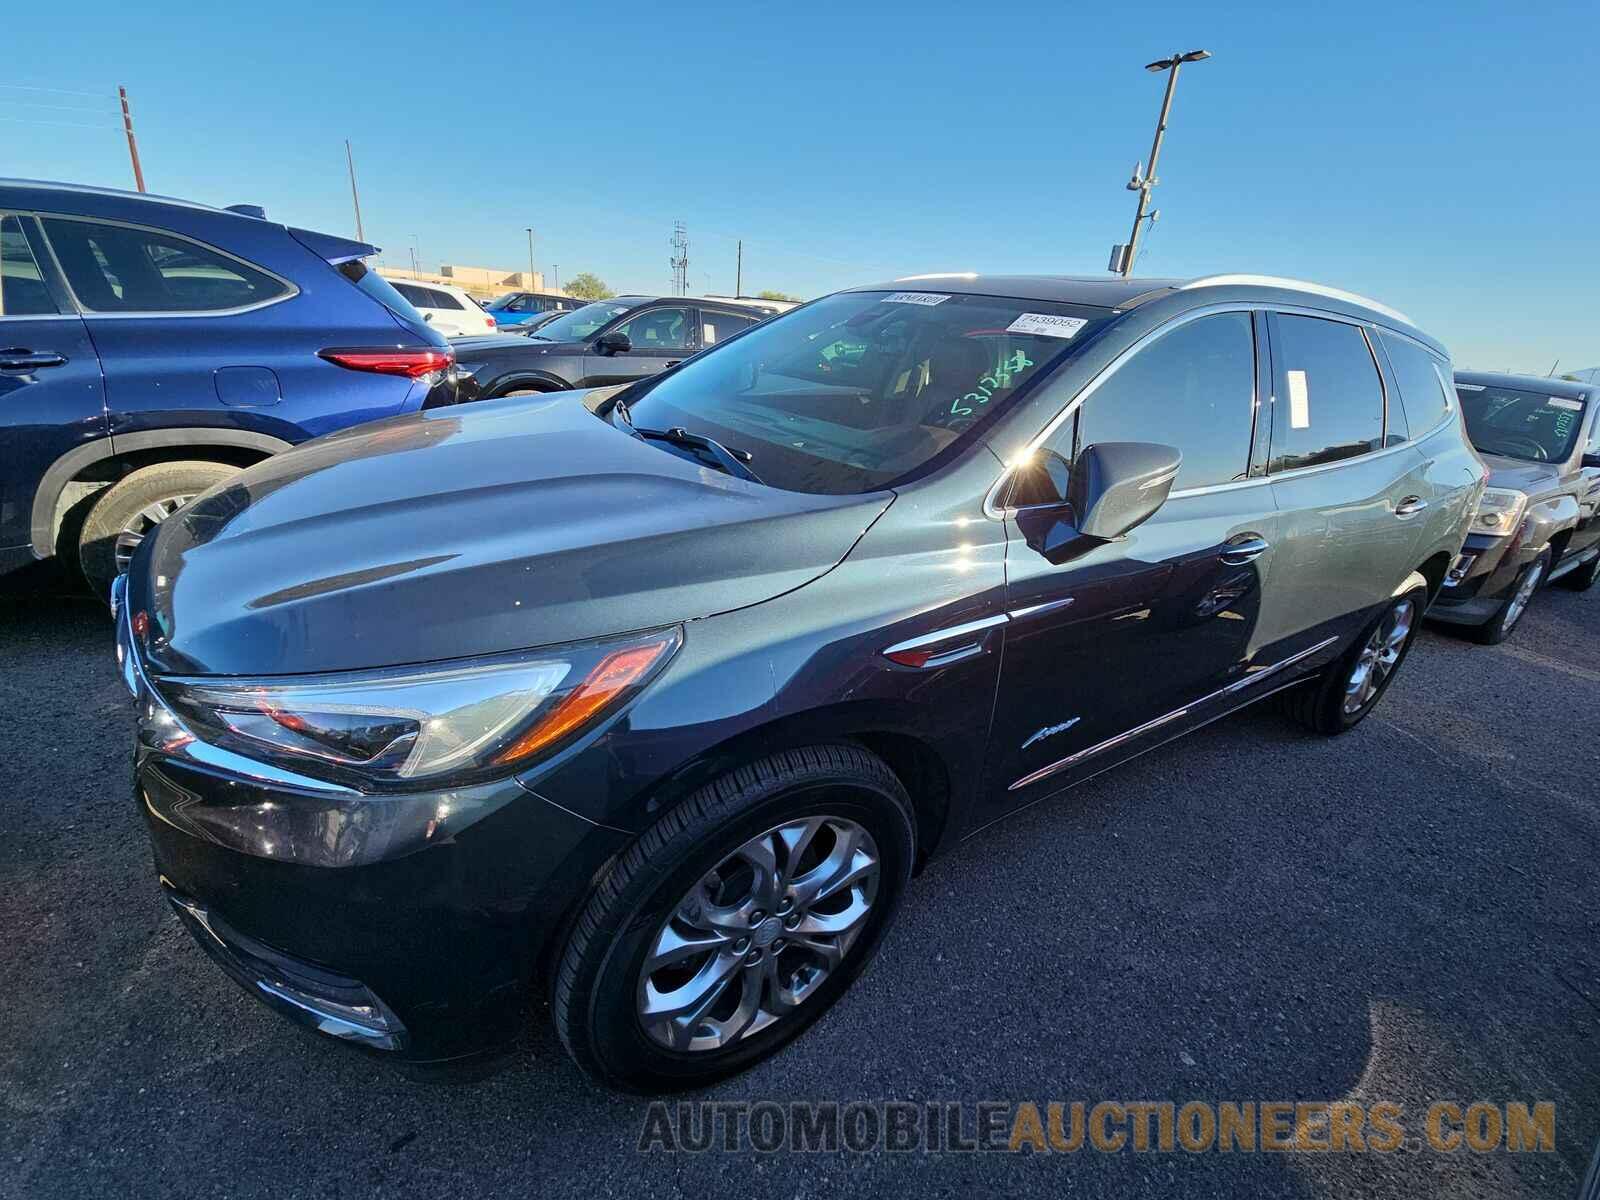 5GAEVCKW2JJ241159 Buick Enclave 2018